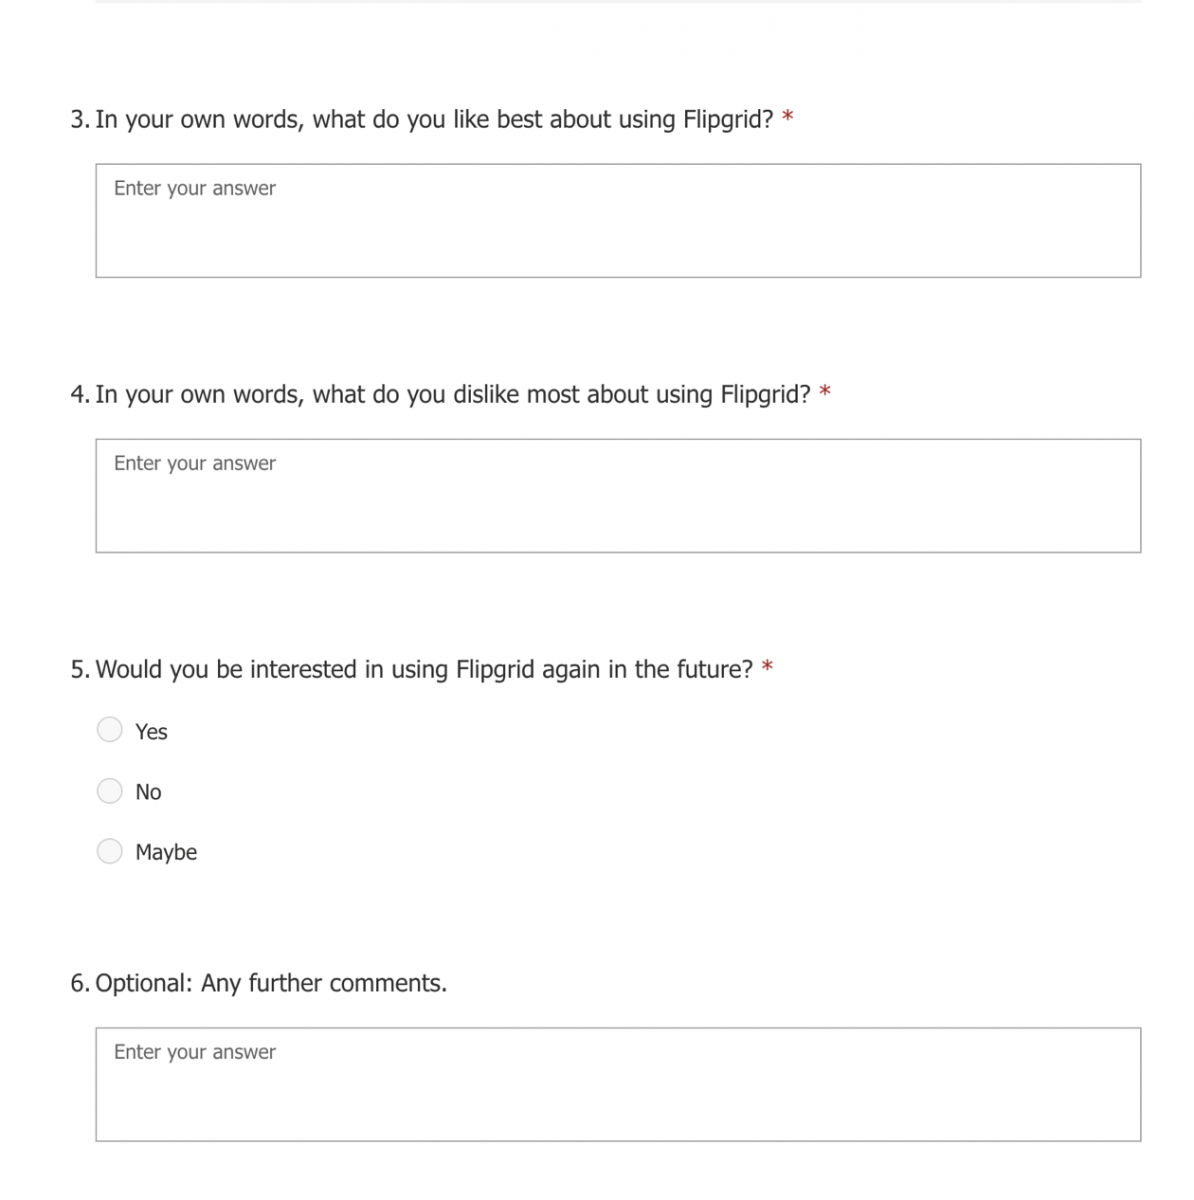 Image of questions 3-6: 3 In your own words - what do you like best about using Flipgrid; what do you dislike most about using Flipgrid; Would you consider using Flipgrid in the future - yes, no, maybe; Final question Optional - any further comments.